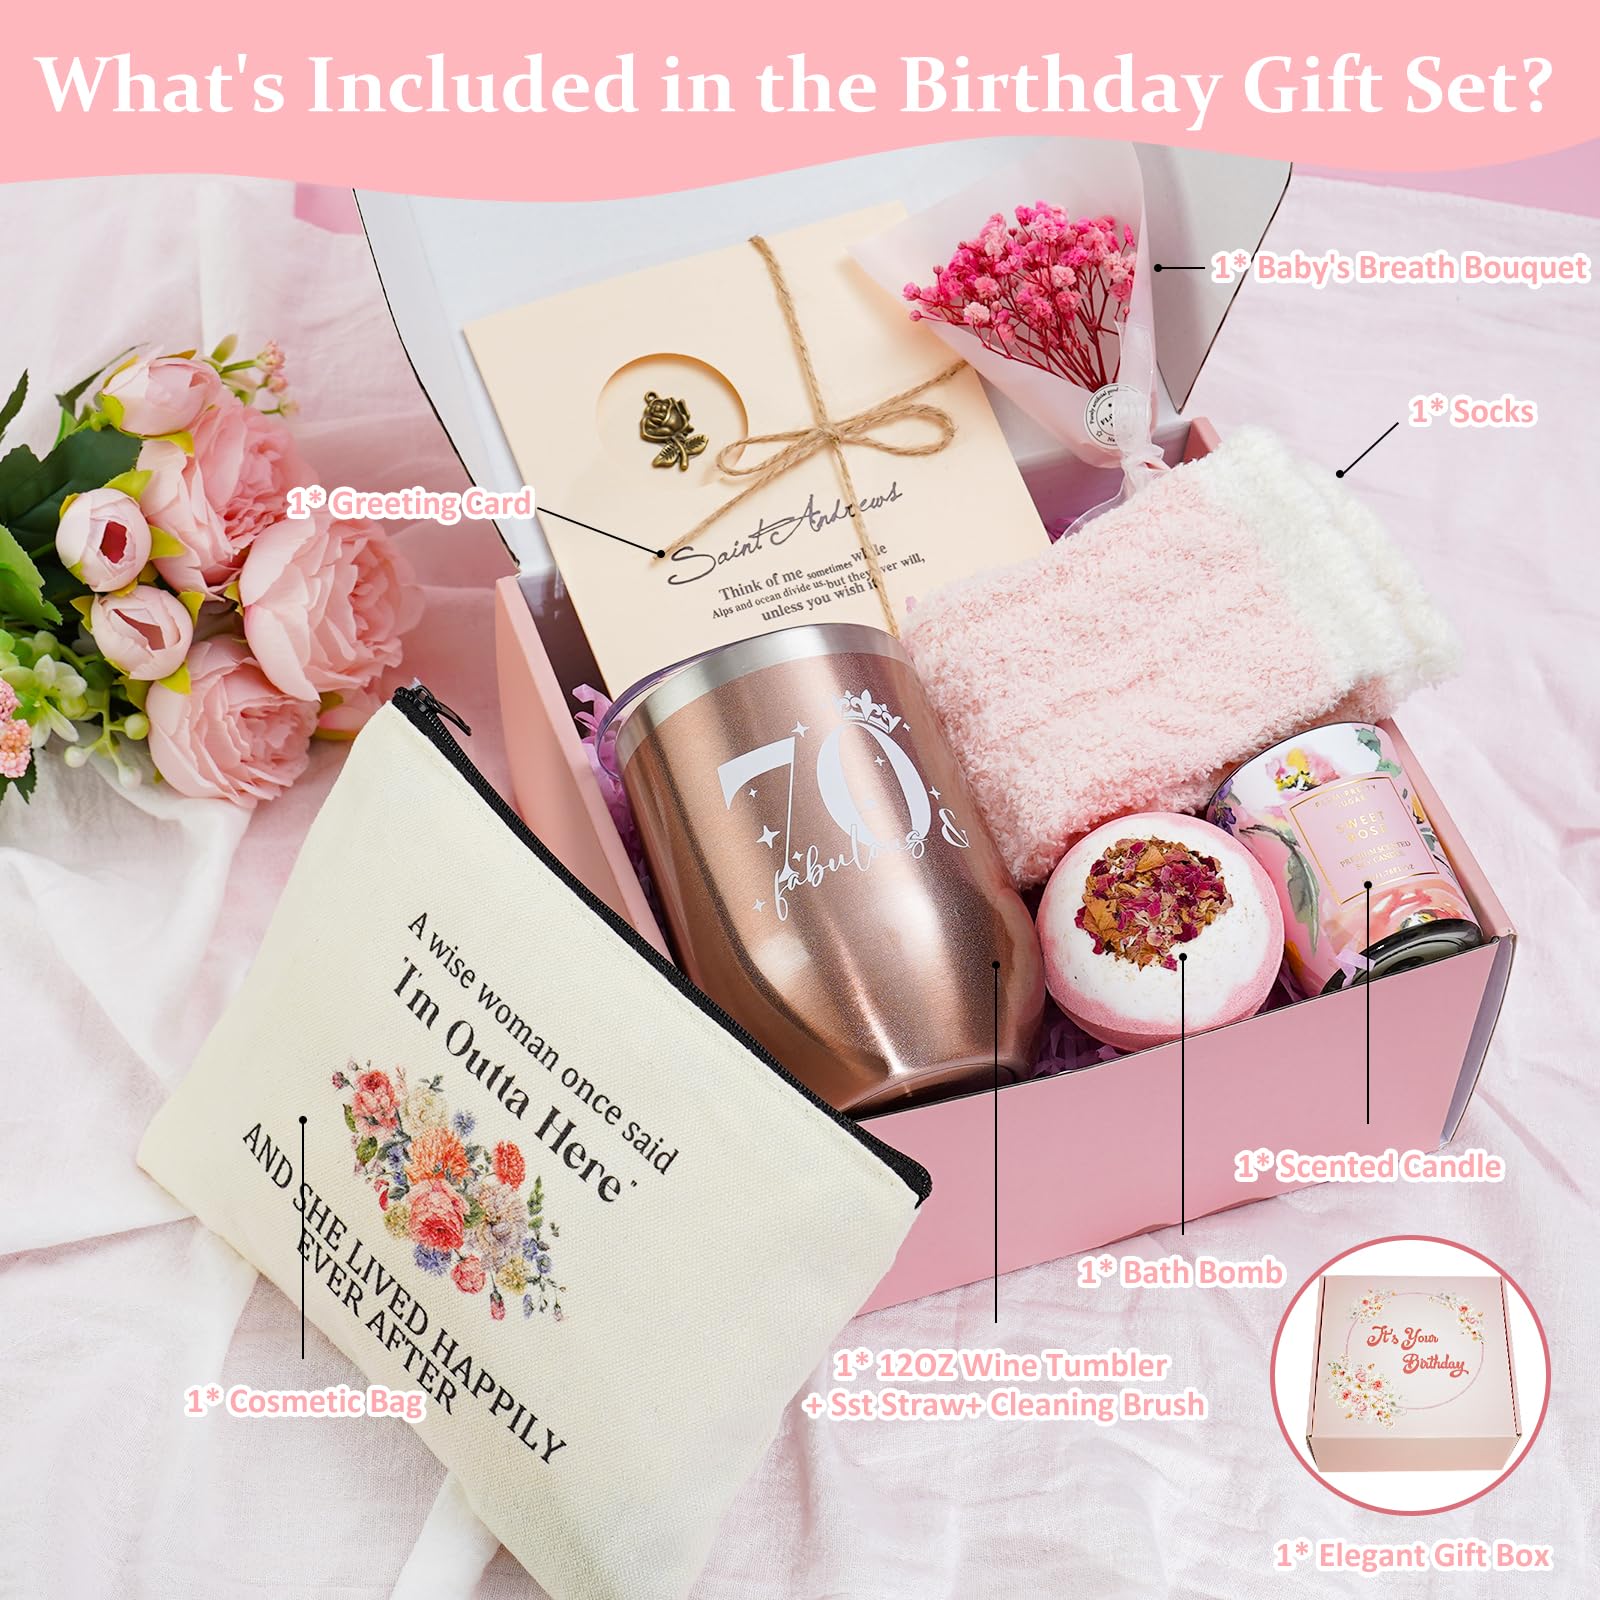 Birthday Gifts for Women, 70th Fabulous Spa Gift Baskets Set for Mom Wife Grandma Best Friends Sister Her, Unique Thank You Gifts Bulk Birthday Decorations Idea Gifts for Women Who Have Everything